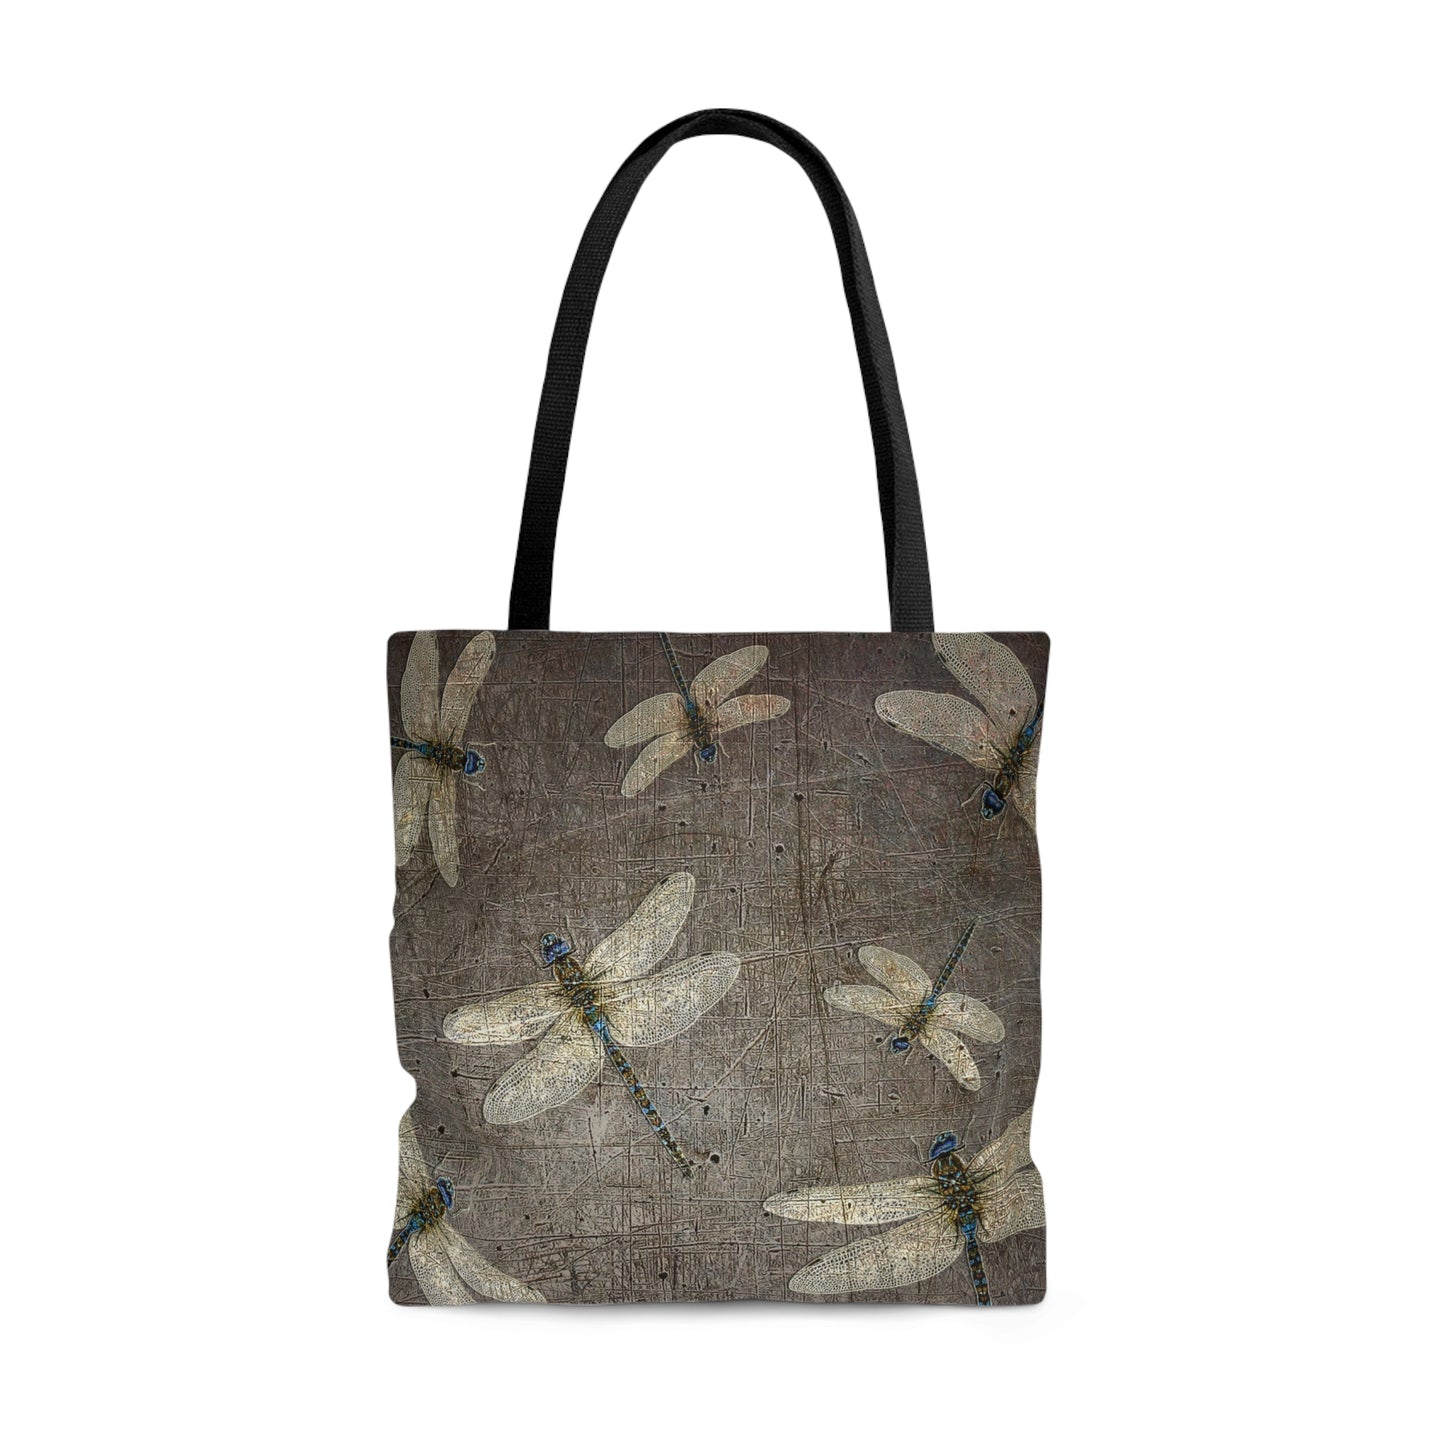 Flight of Dragonflies on Distressed Gray Stone Printed on Tote Bag small front